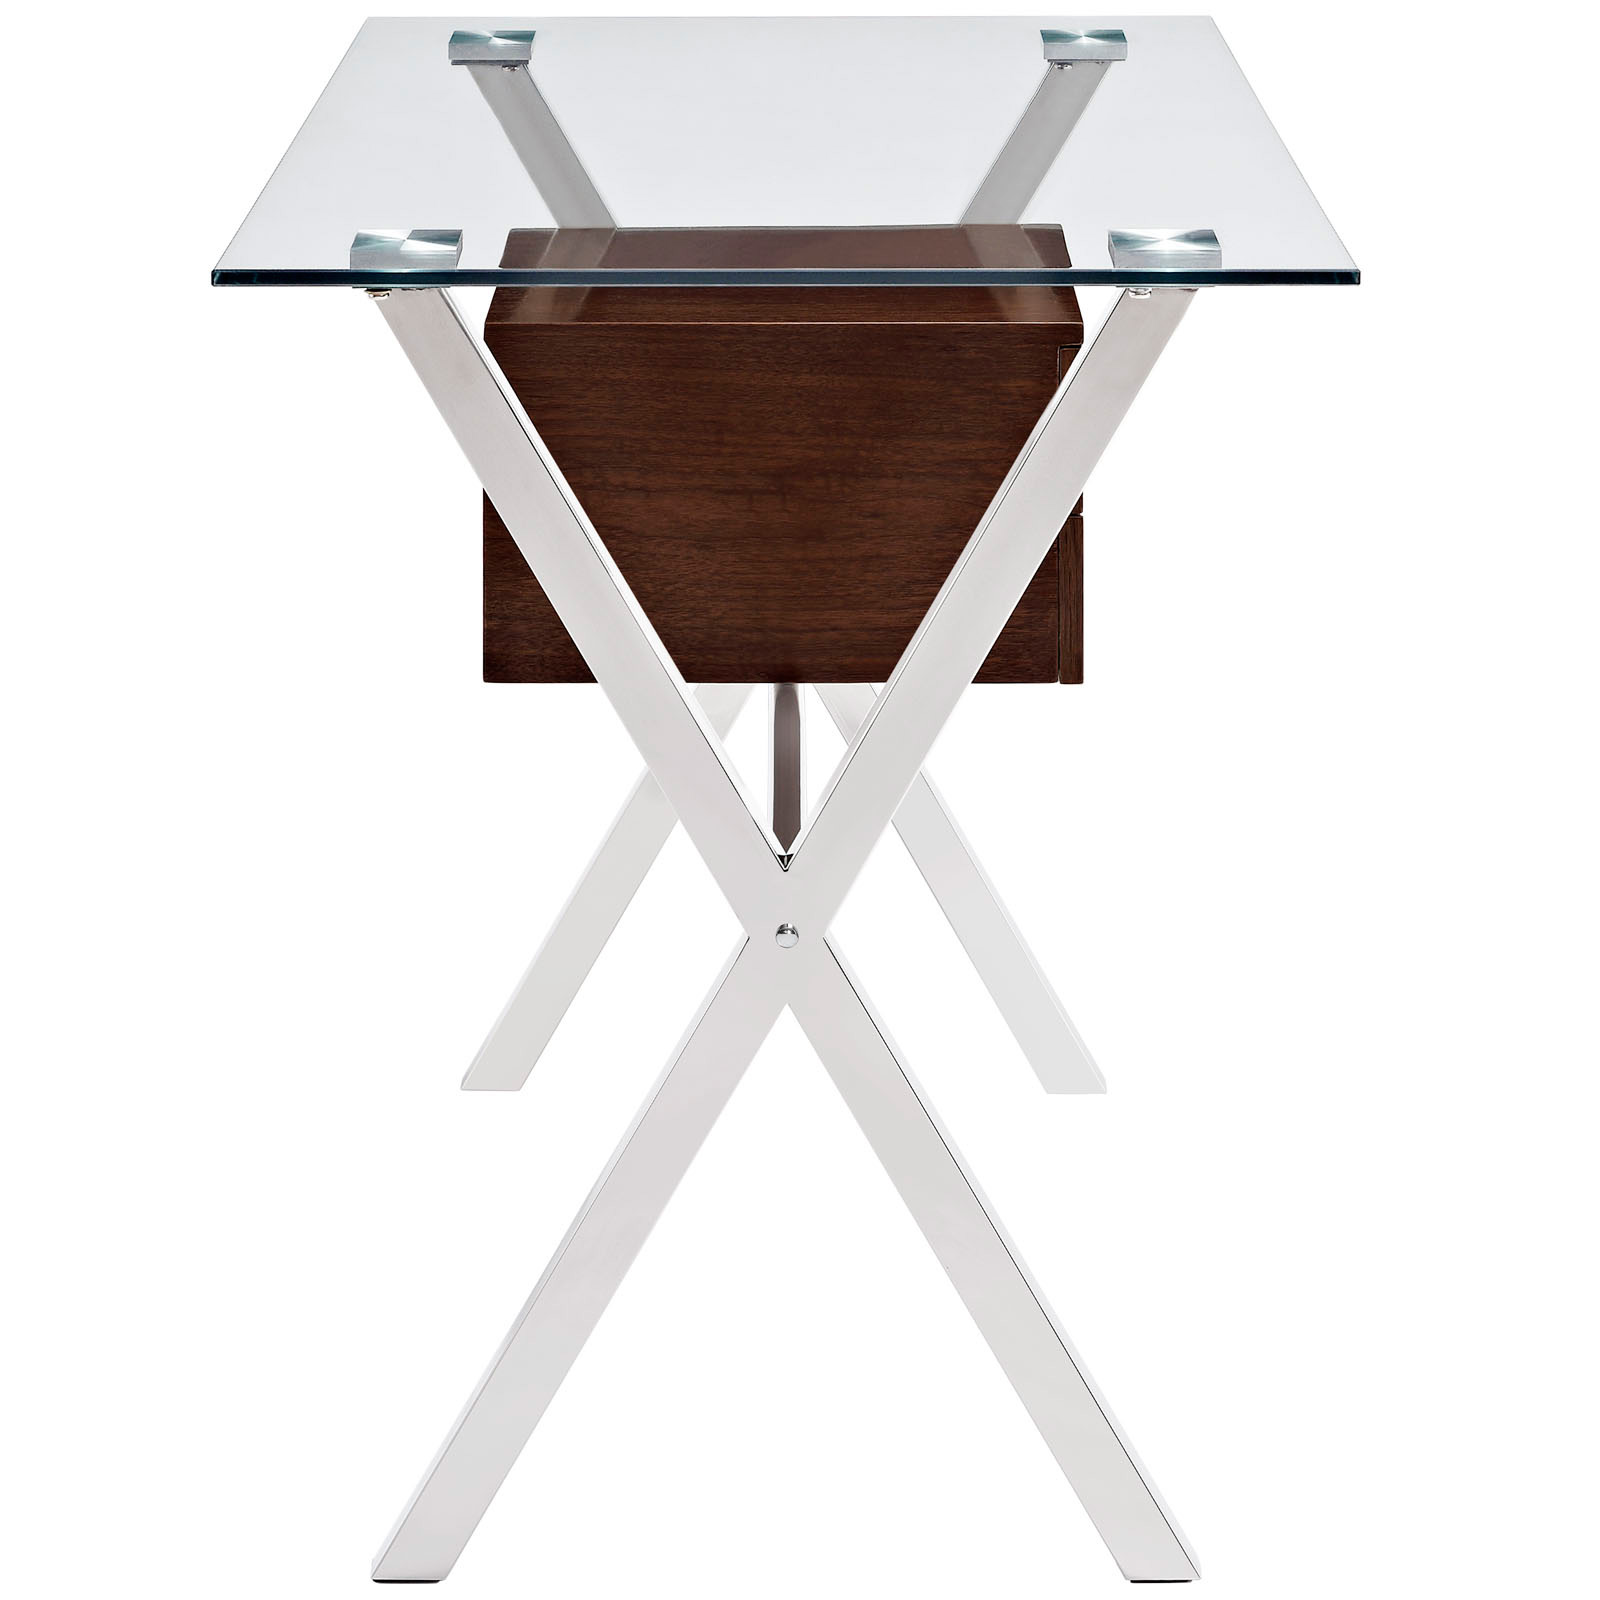 Space saving desk from Modway - Side View - Shown in Walnut (Brown)